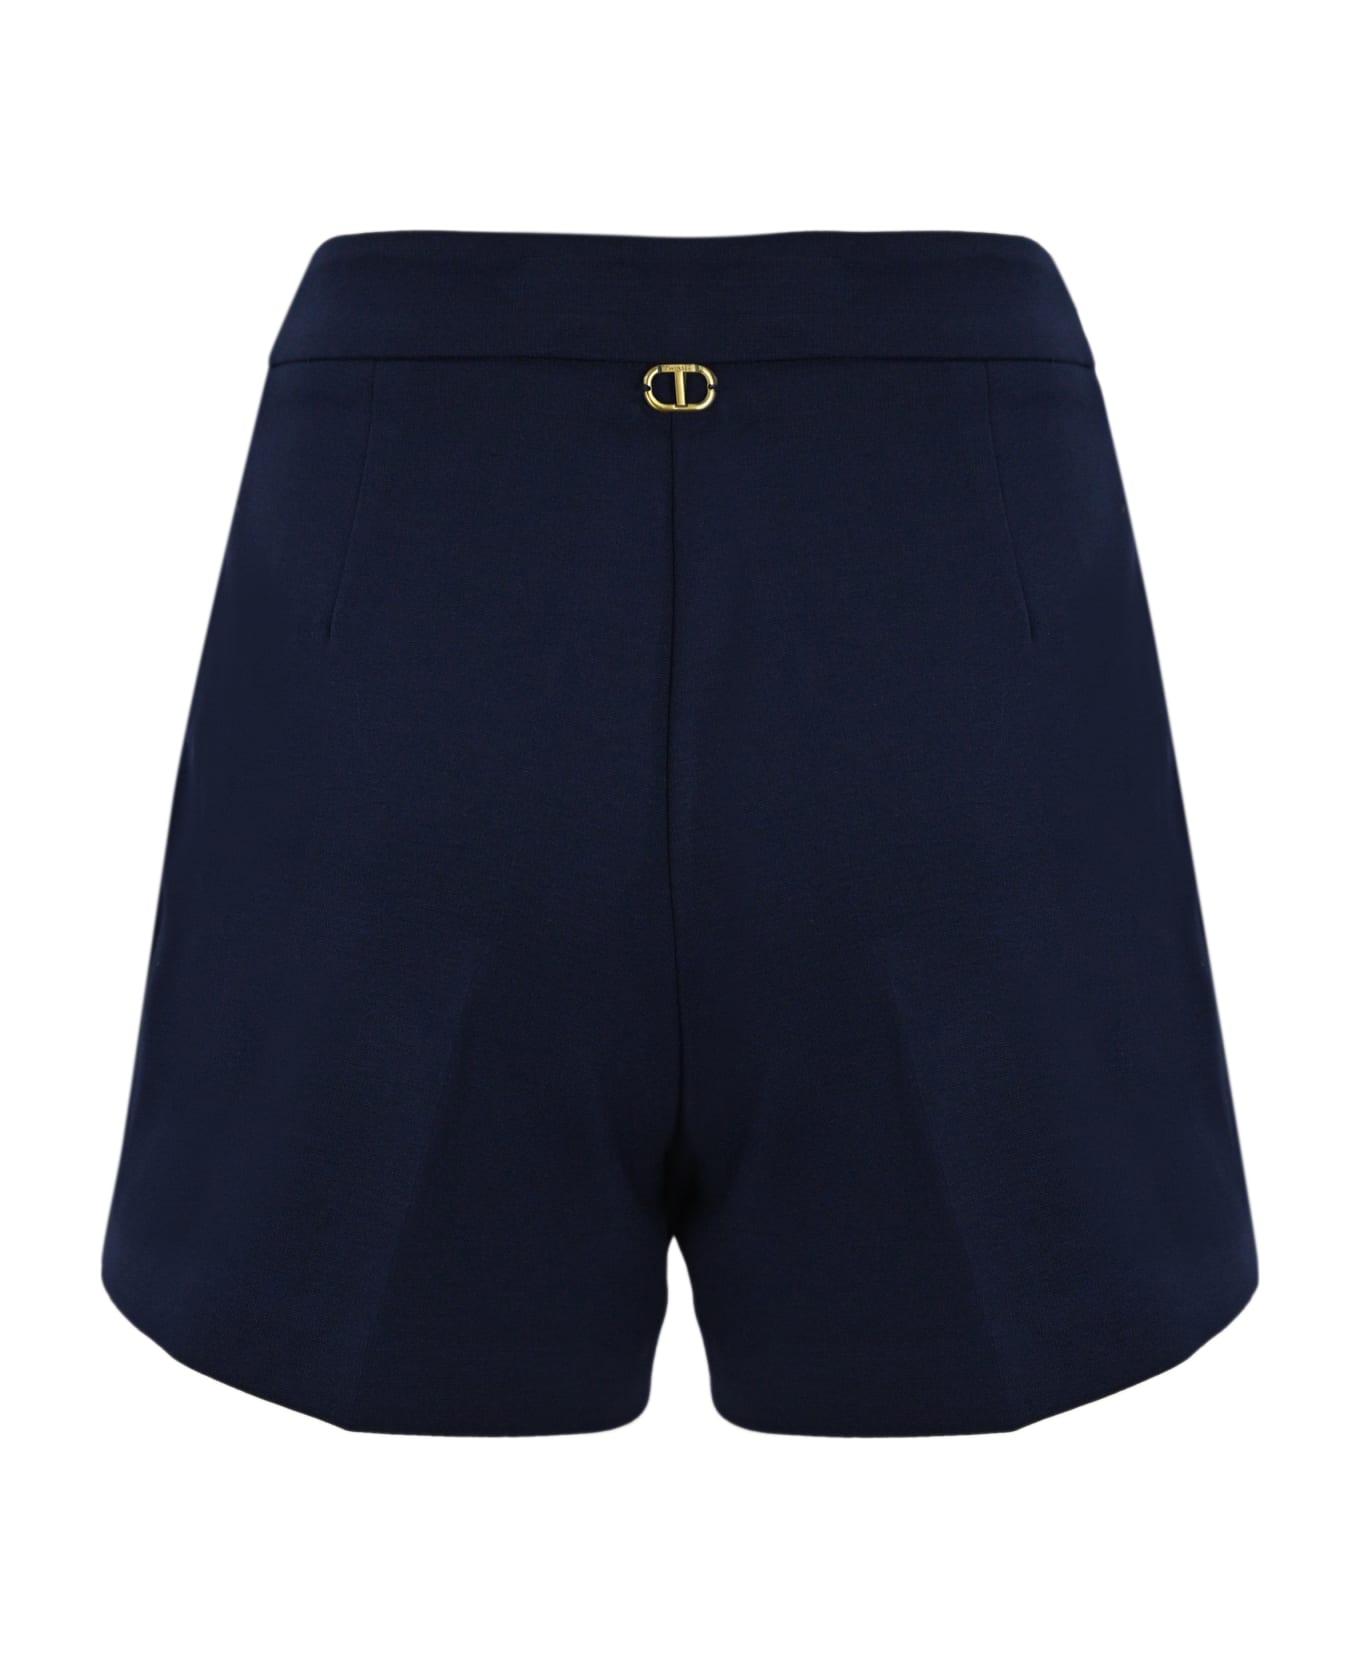 TwinSet Oval T Button Shorts - MID BLU